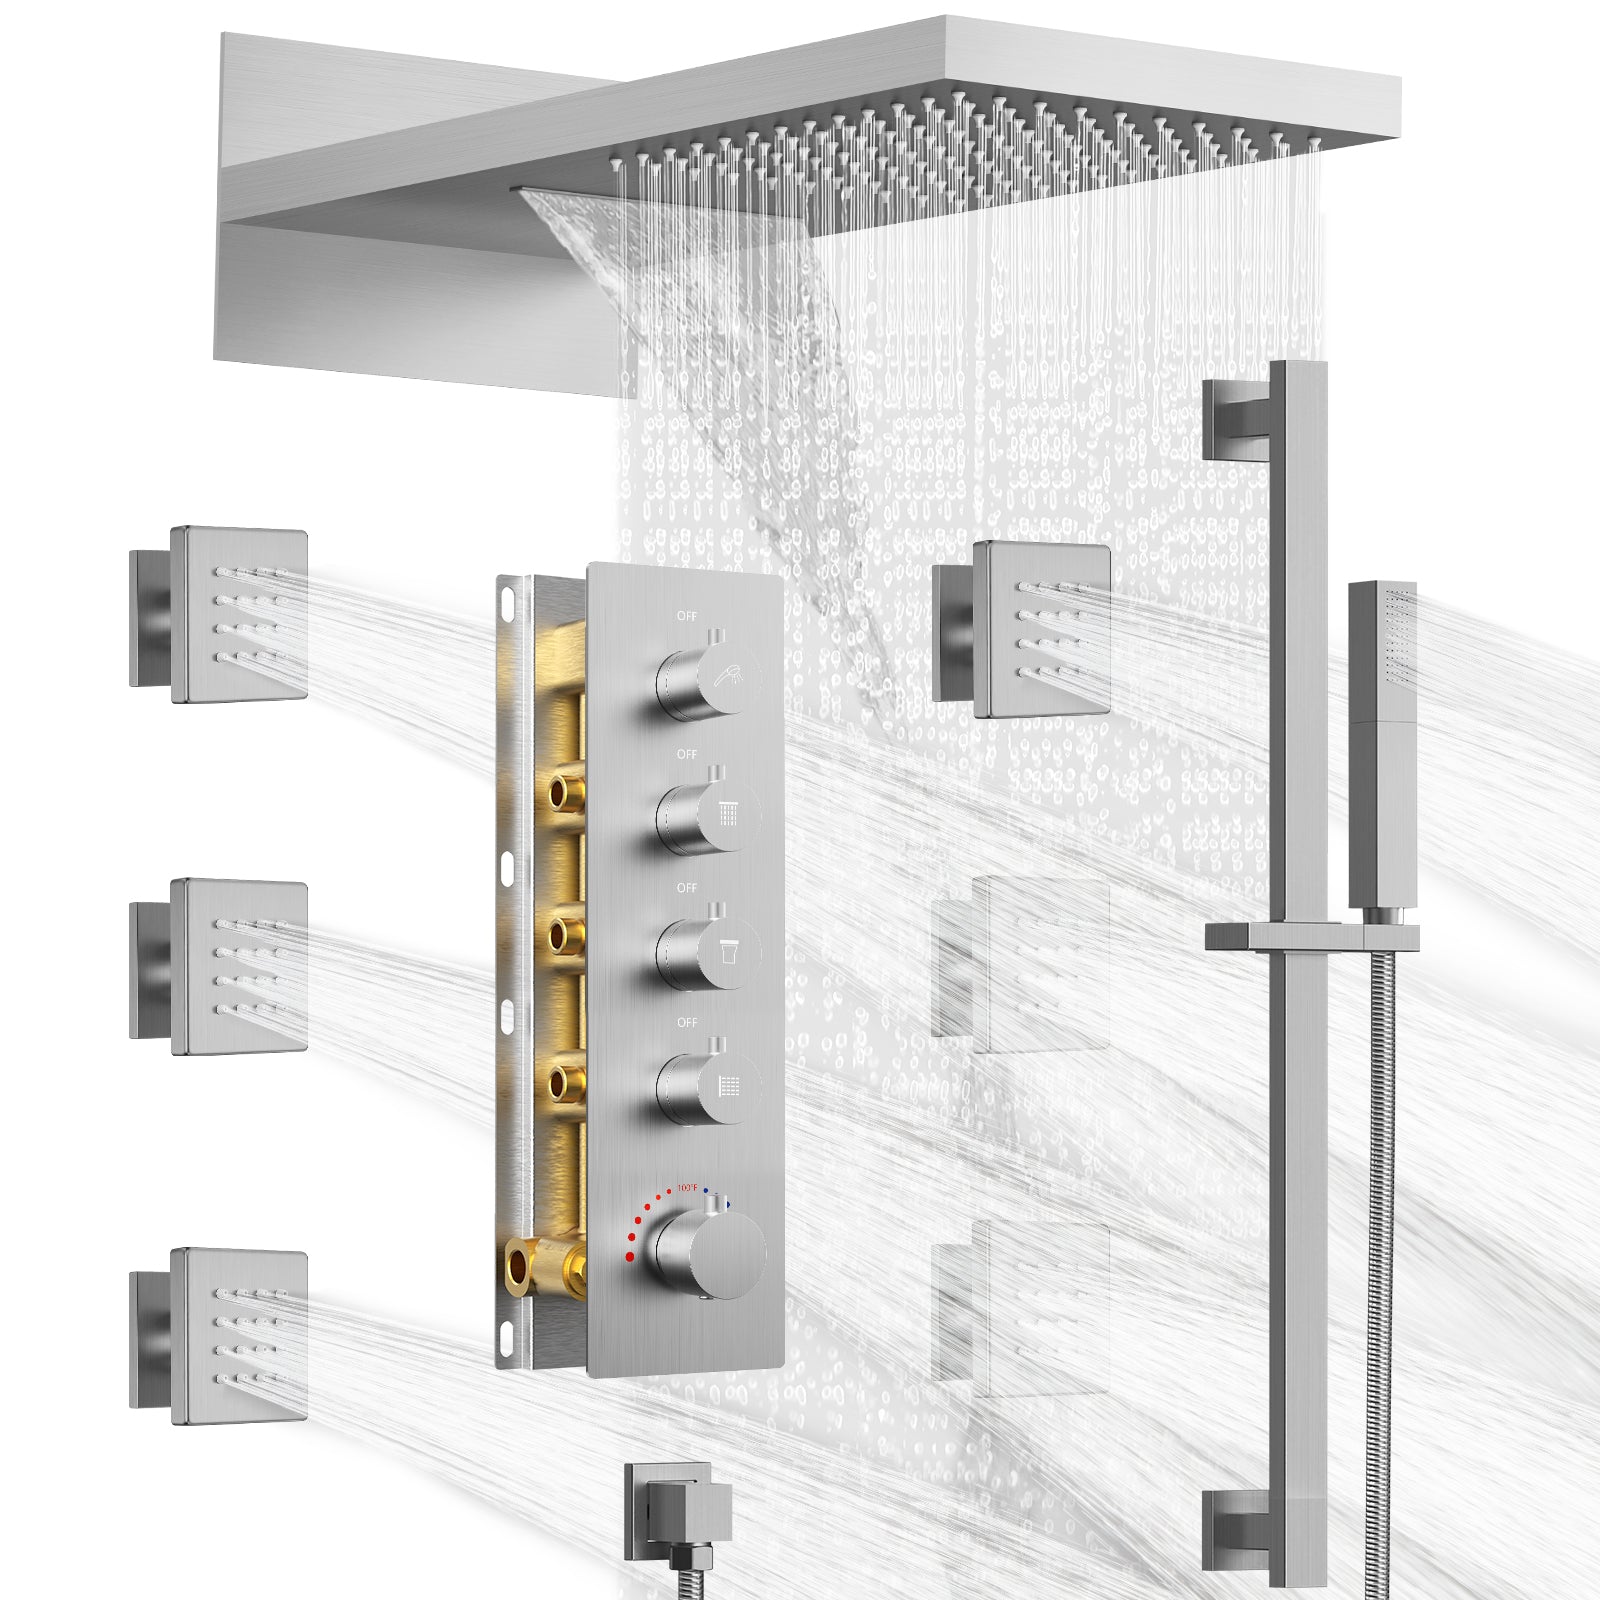 EVERSTEIN Luxury 22" High Pressure Rainfall & Waterfall Shower System with 6x2" Body Jets and Adjustable Handheld Wand - Wall Mounted, Built-in Valve, Brushed Nickel, SFS-1030-NK22